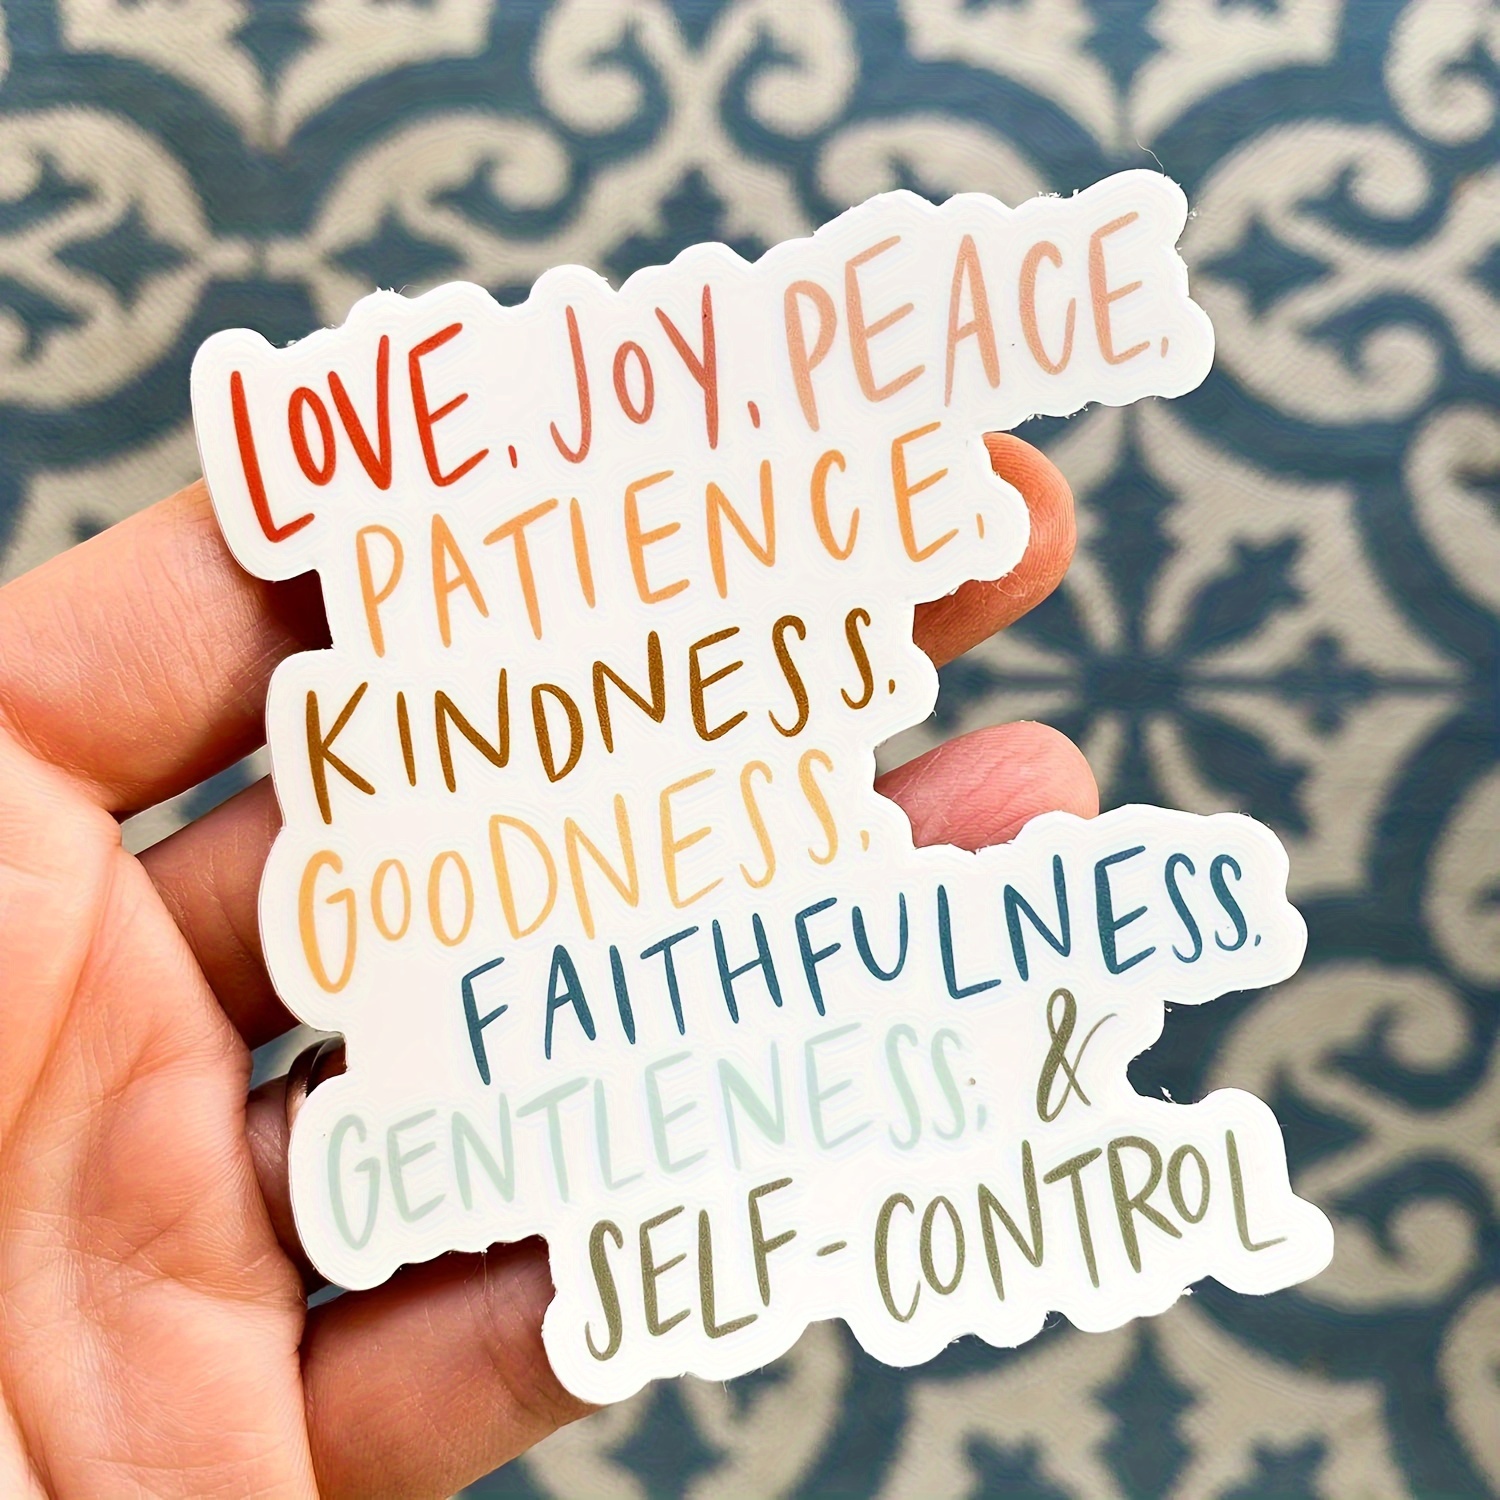 

Stickers|waterproof Stickers|love Joy Peace Kindness Laptop Decals, Stickers For Water Bottles, Car Decals, Skateboard Stickers, Funny Stickers, Small Gifts